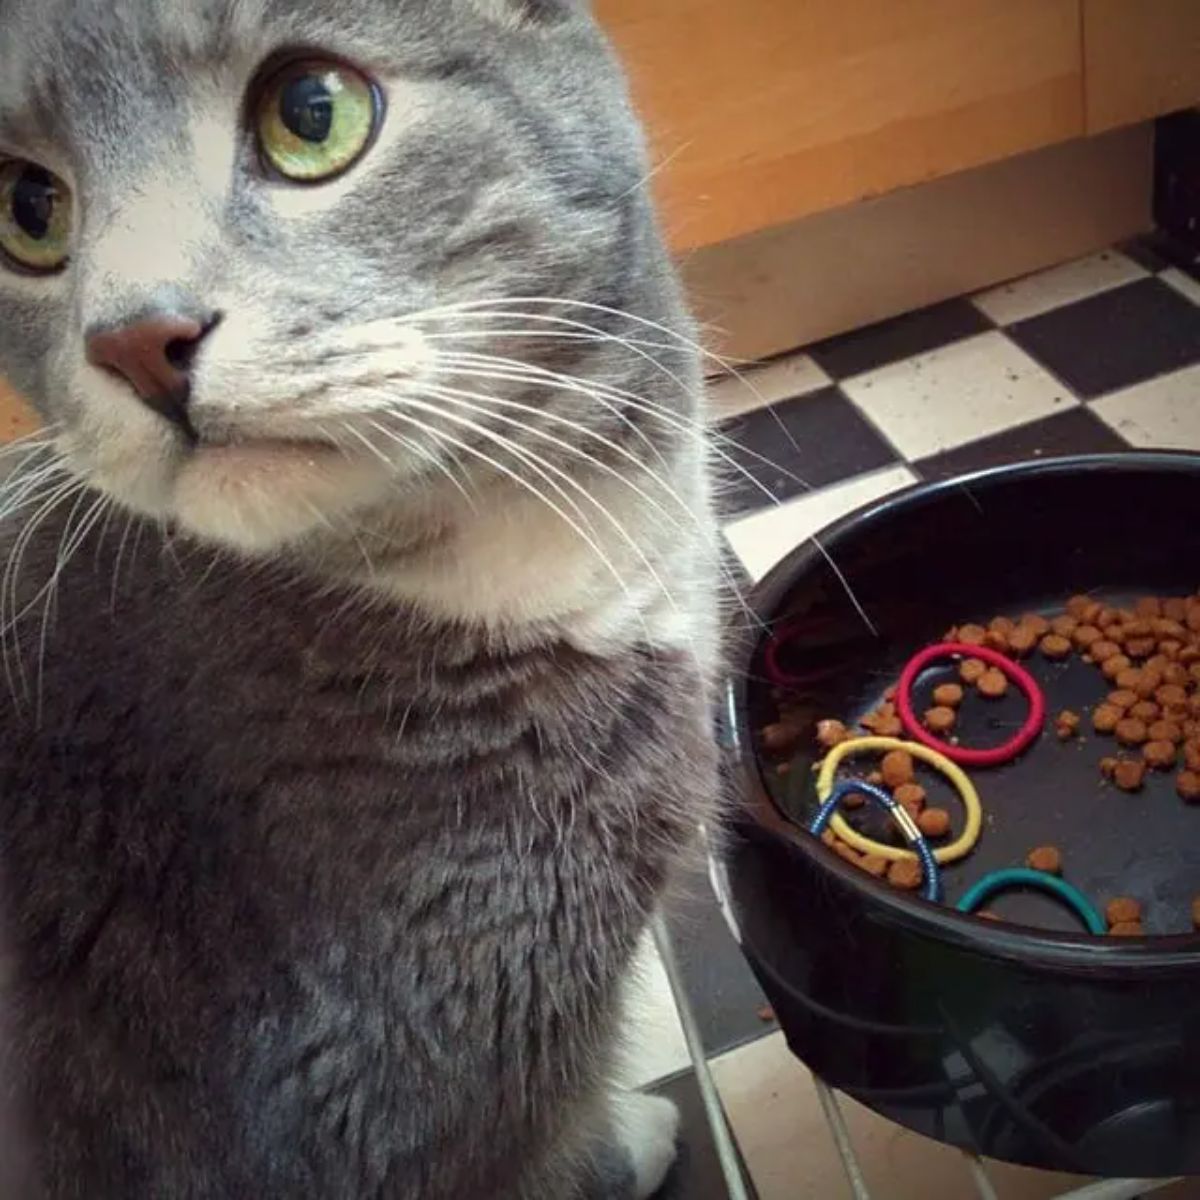 grey and white cat sitting next to a black bowl of cat food with 4 colourful hair ties inside it